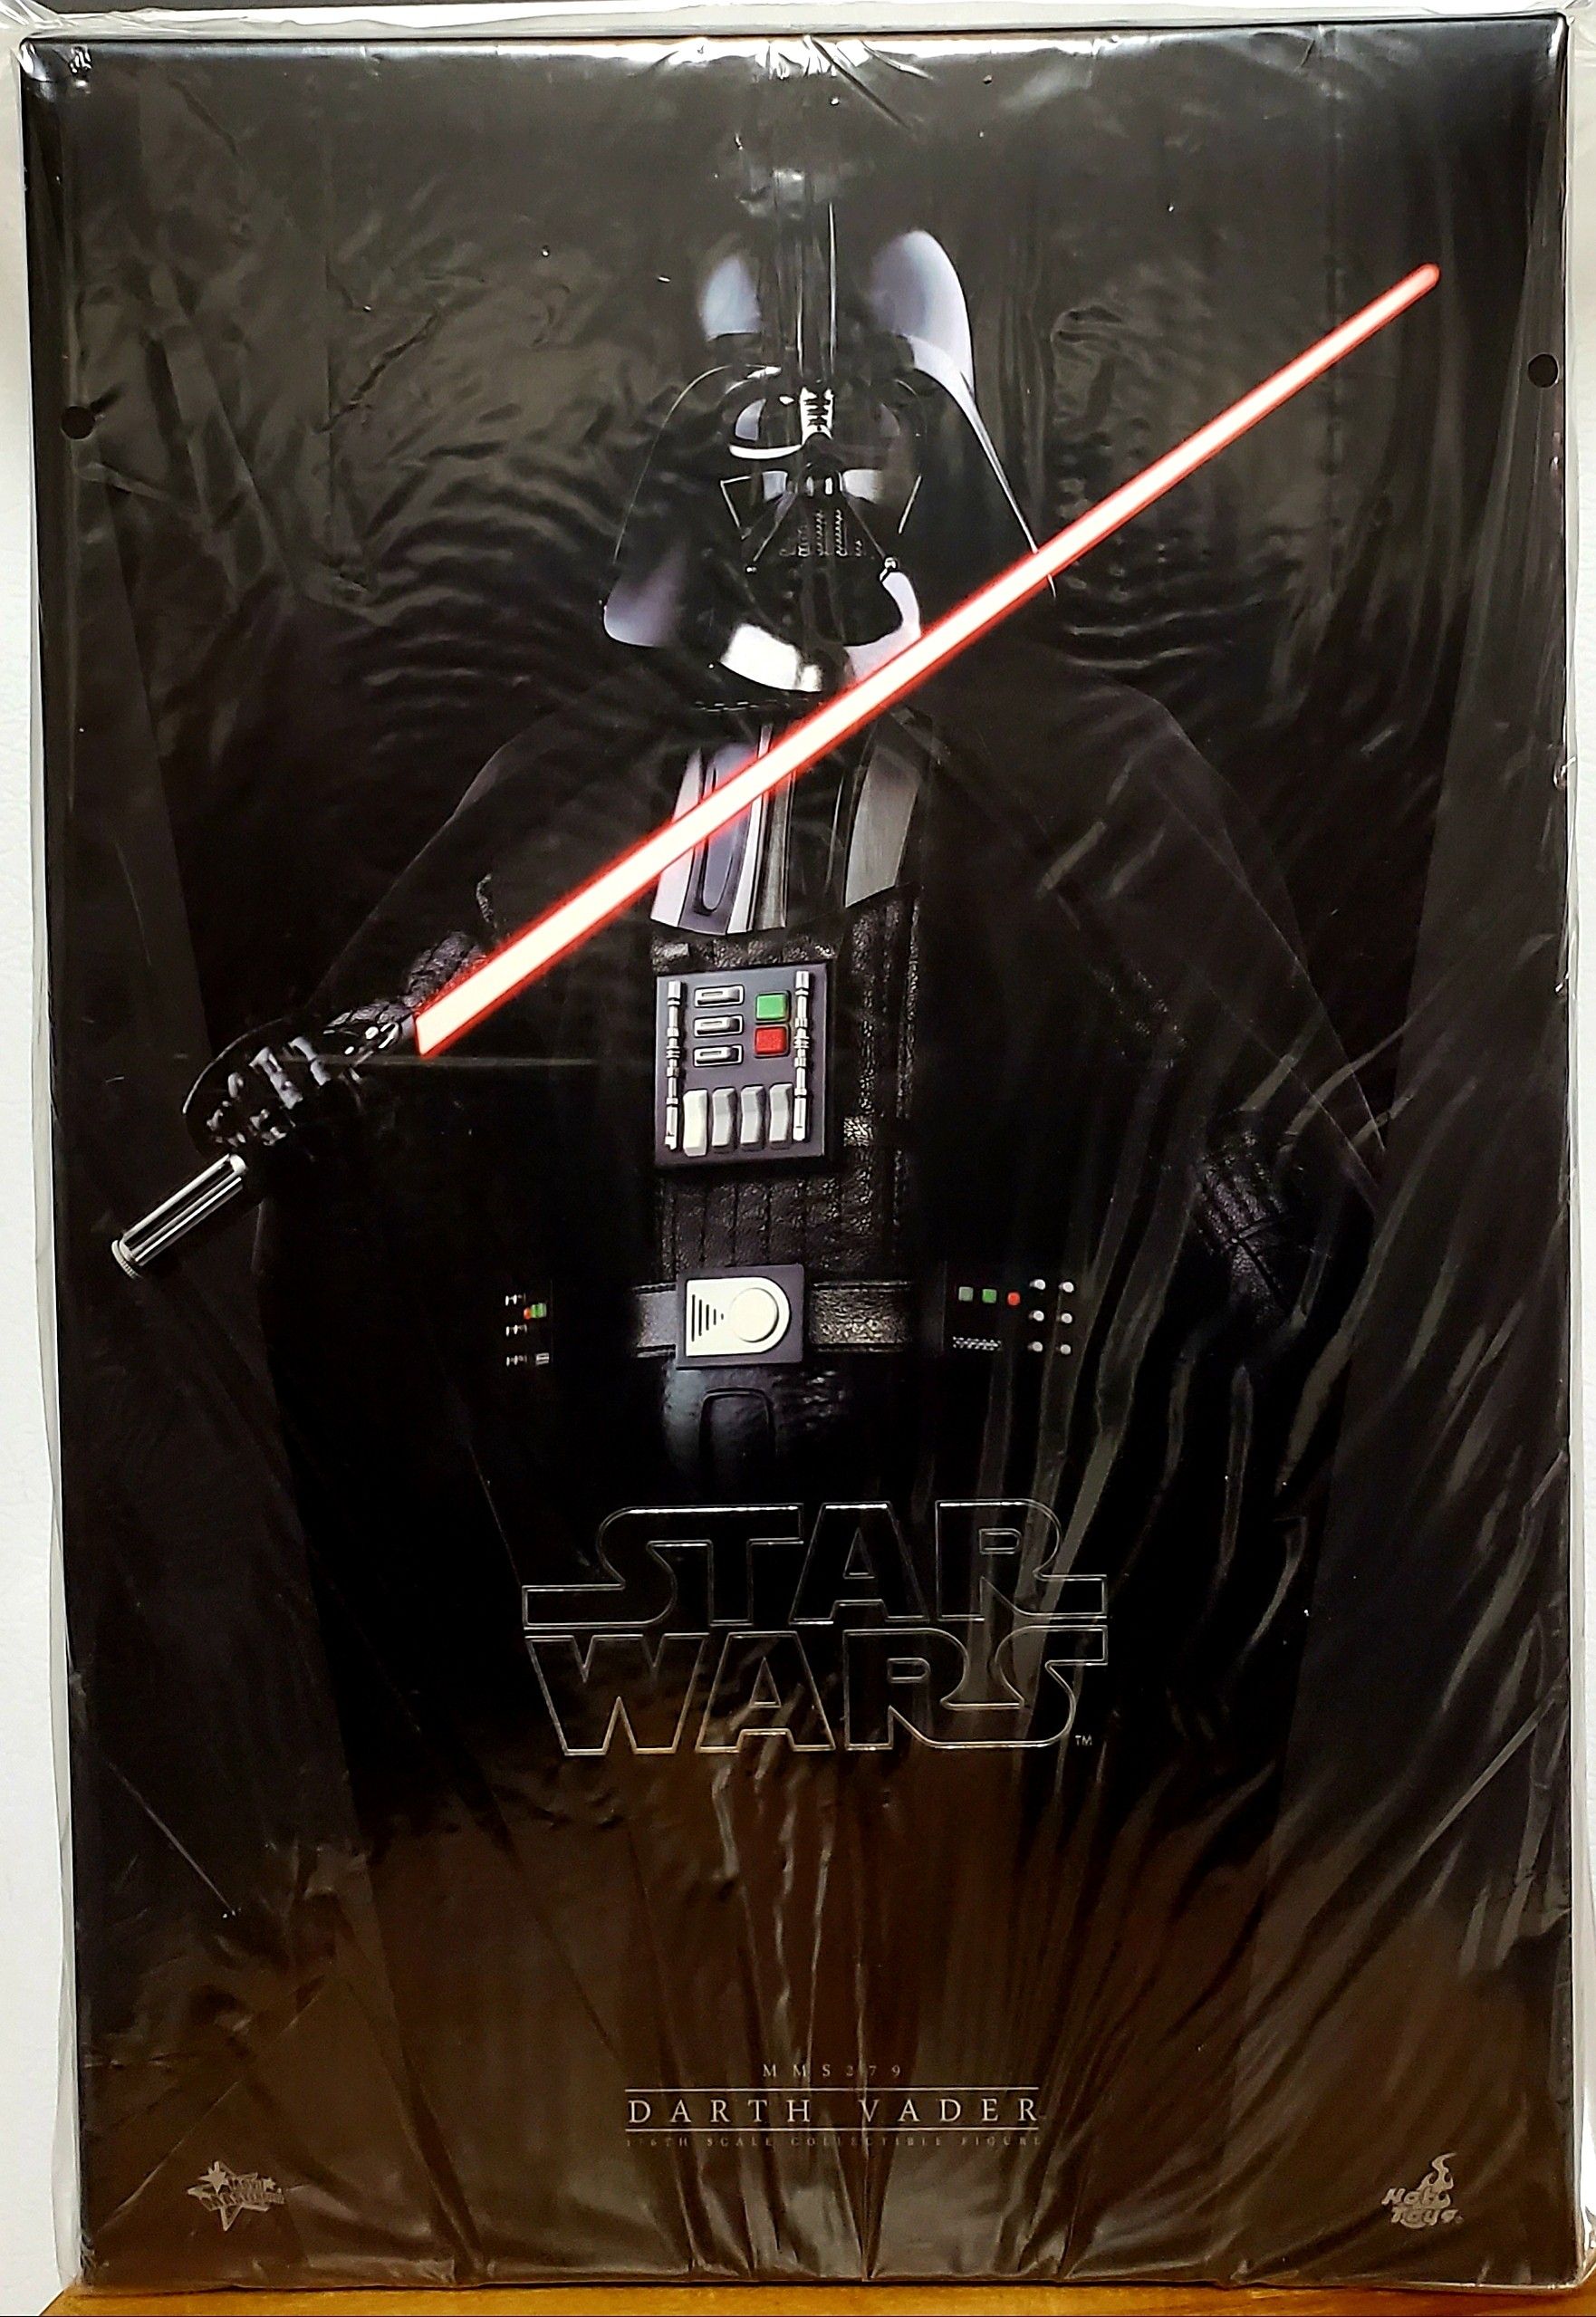 Hot Toys Star Wars Episode IV DARTH VADER (MMS279) 1/6 scale collectible figure (New in box!)